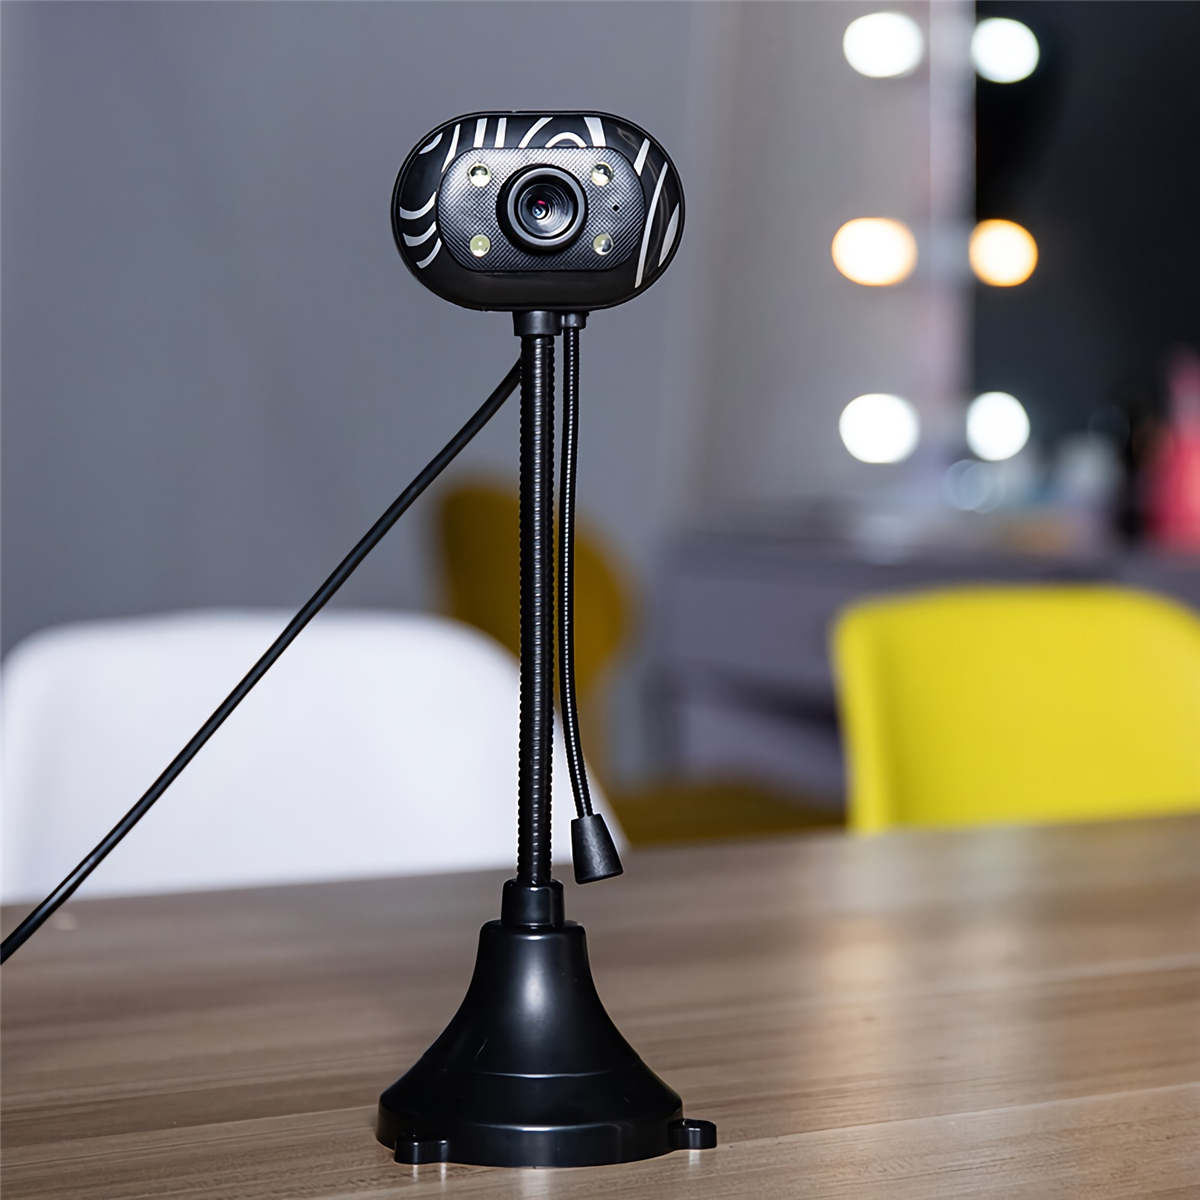 Find 480P HD Webcam CMOS USB 2.0 Wired Computer Web Camera Built-in Microphone Camera for Desktop Computer Notebook PC for Sale on Gipsybee.com with cryptocurrencies